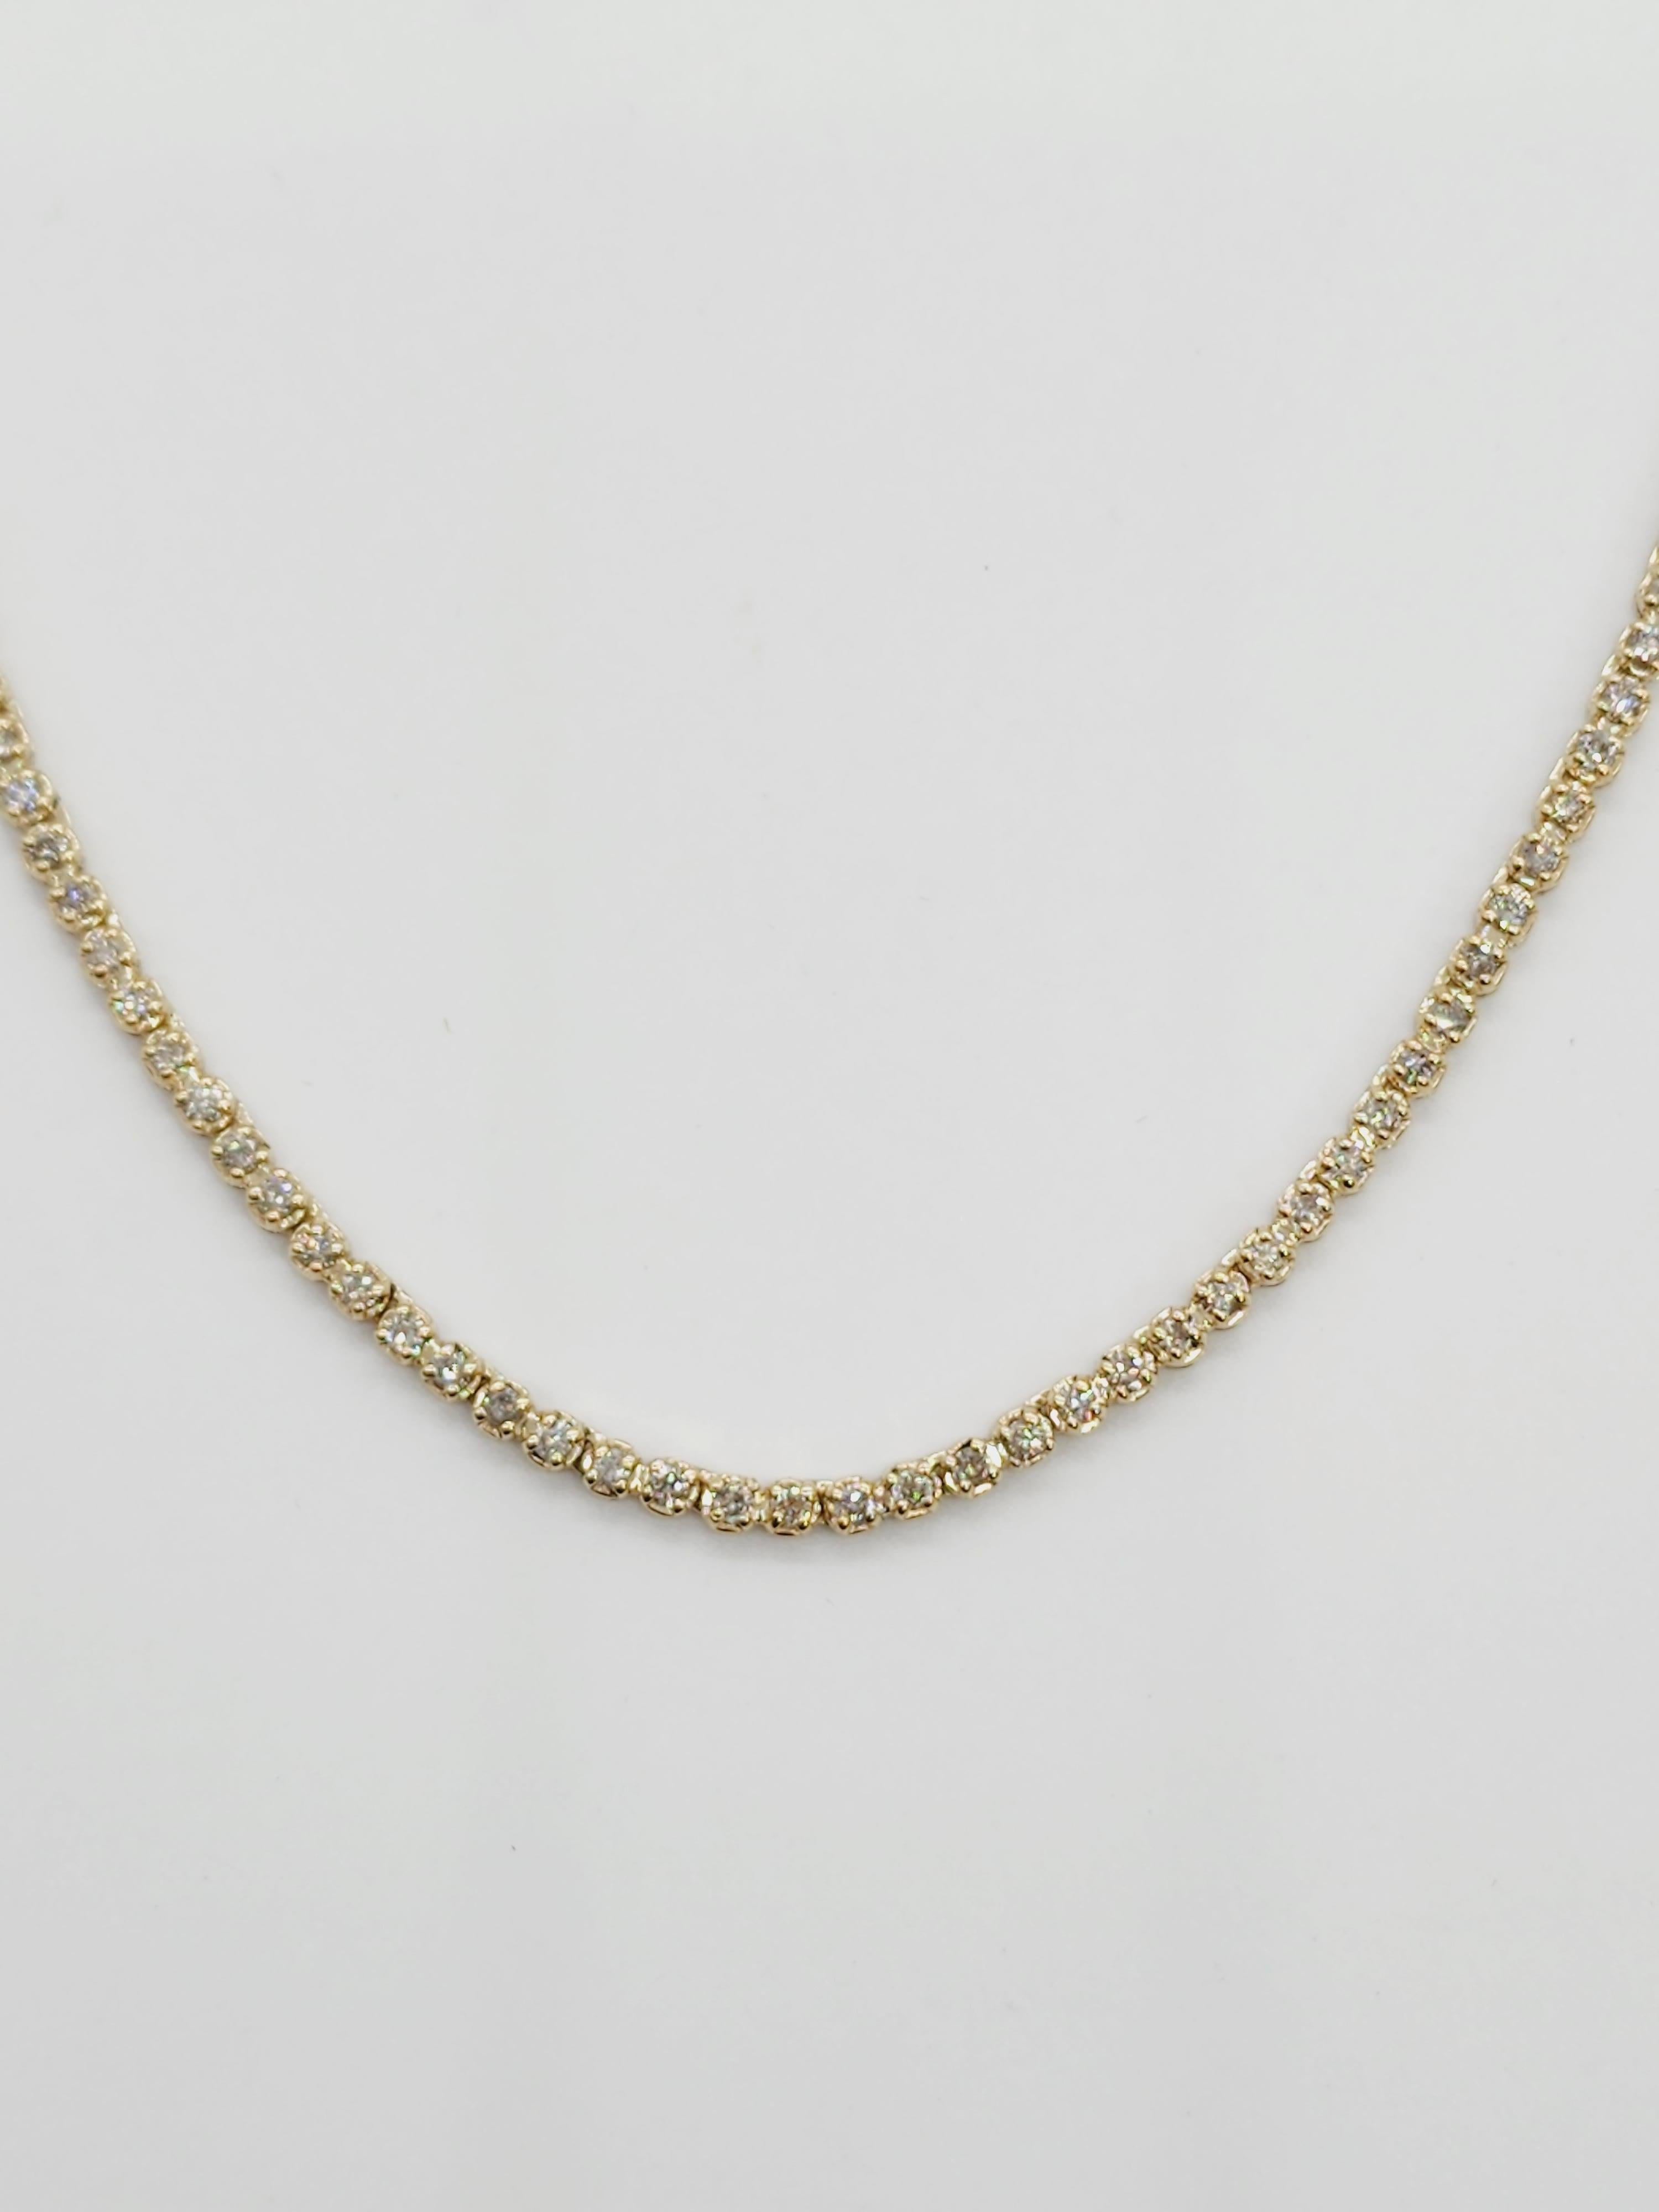 Brilliant and beautiful buttercup necklace, natural round-brilliant cut
14k yellow gold buttercup setting. 
16 inch length. Average I Color, SI Clarity.

*Free shipping within the U.S.*